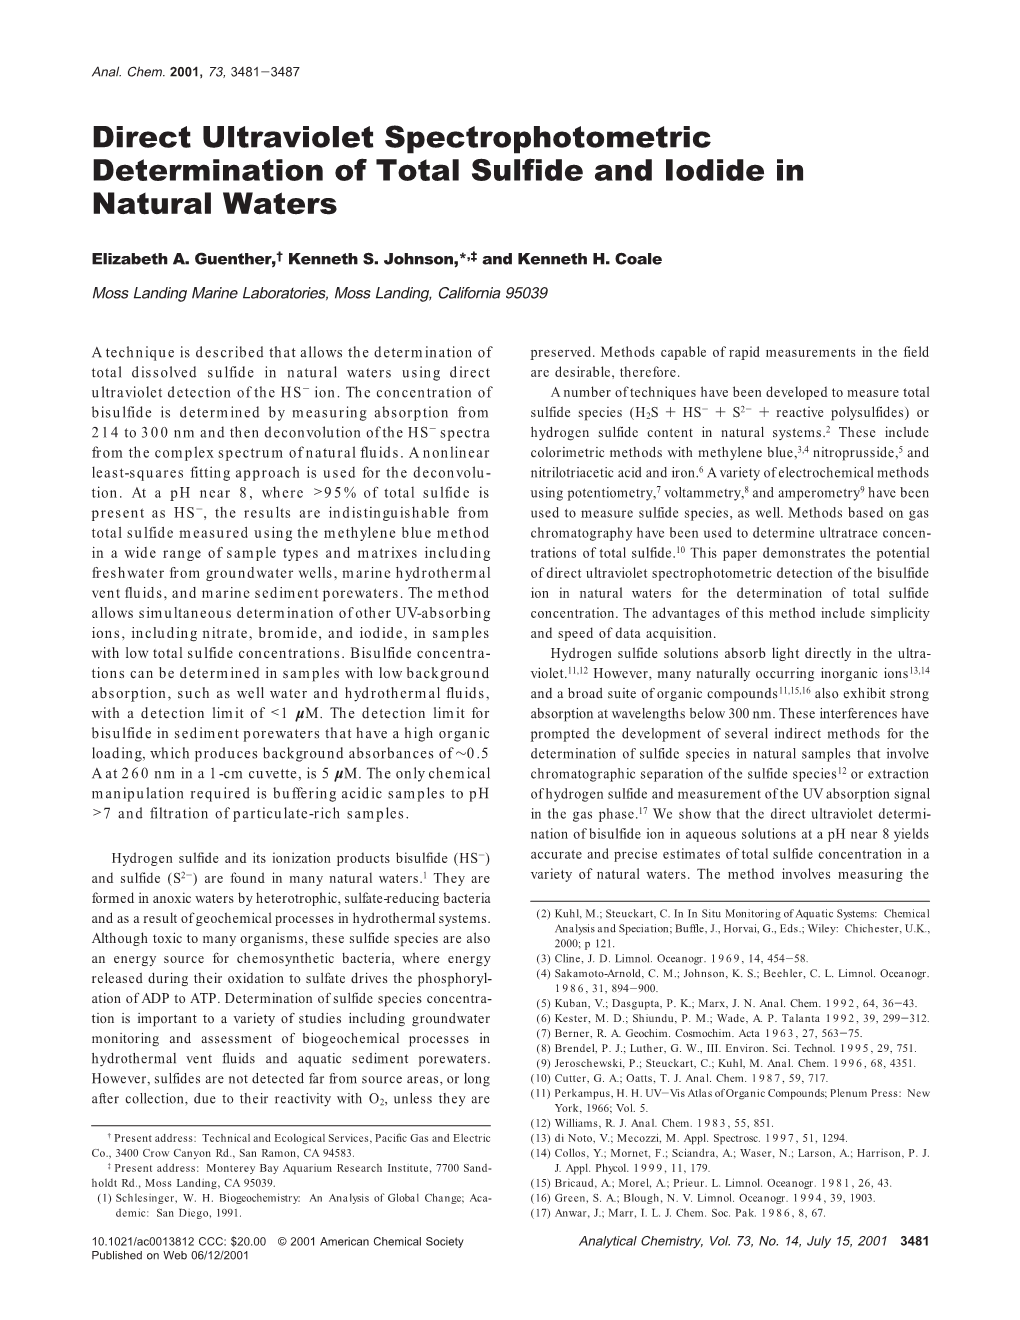 Direct Ultraviolet Spectrophotometric Determination of Total Sulfide and Iodide in Natural Waters